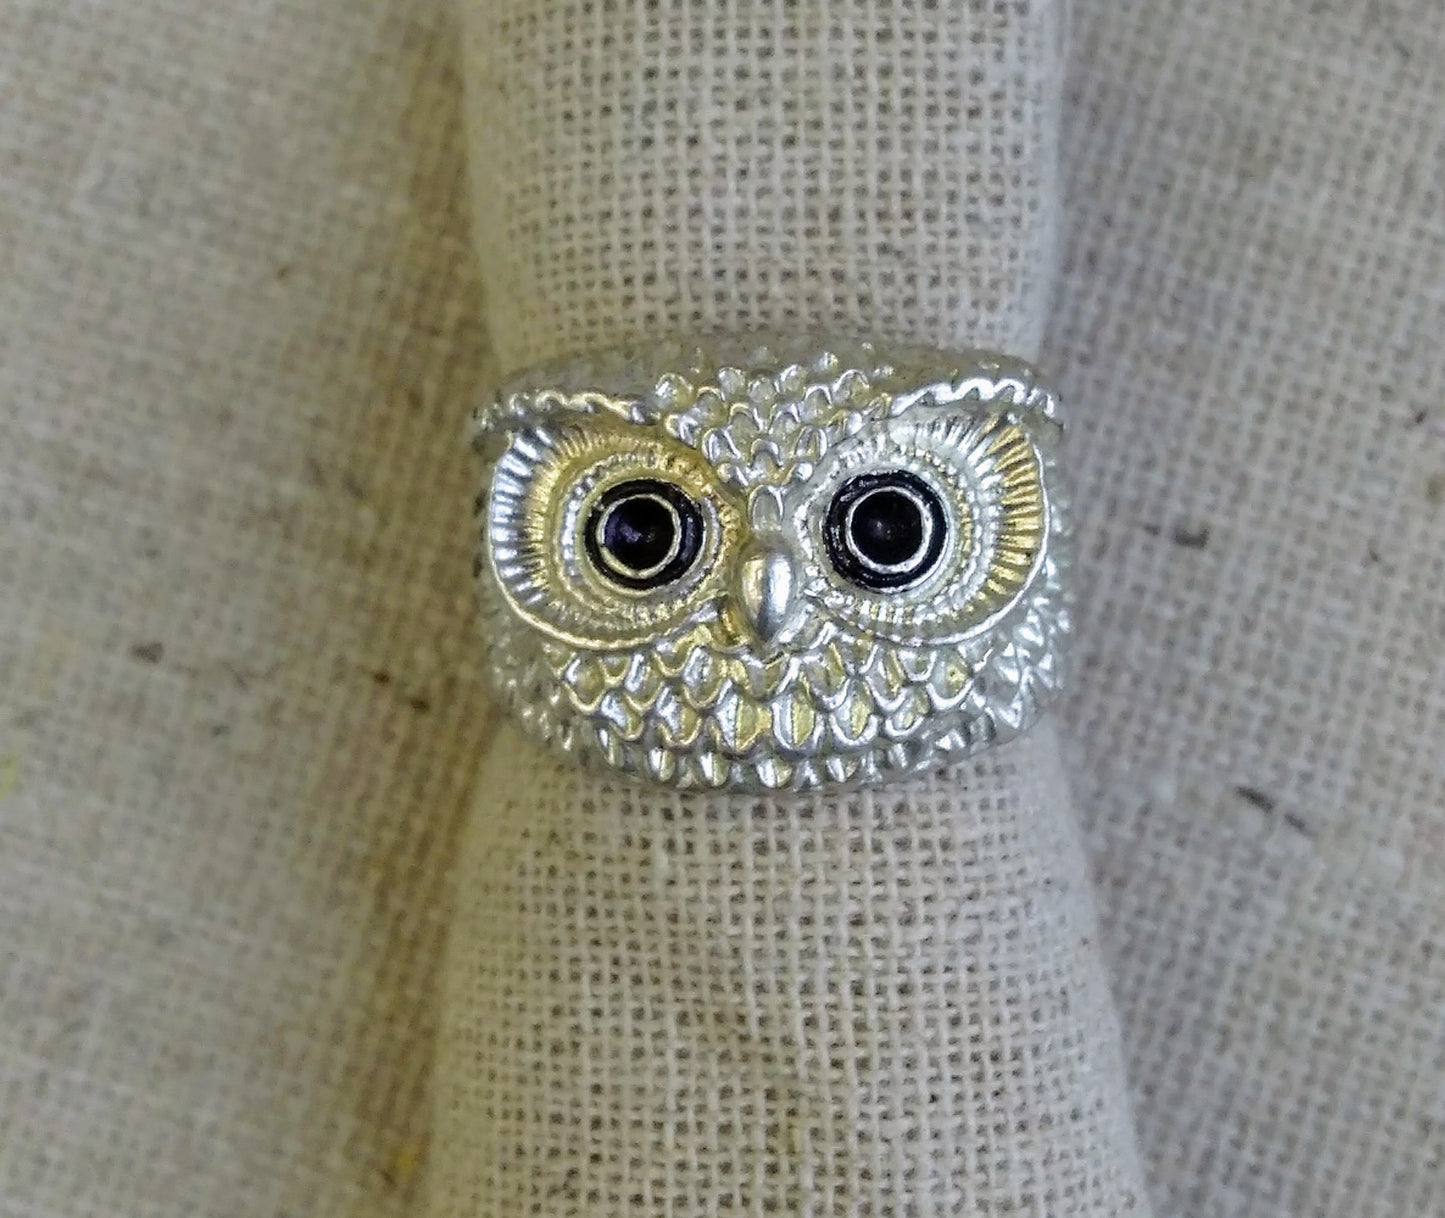 Detail of the hand carved silver wide-eyed owl head with dark stone eyes and brilliant feather detailing